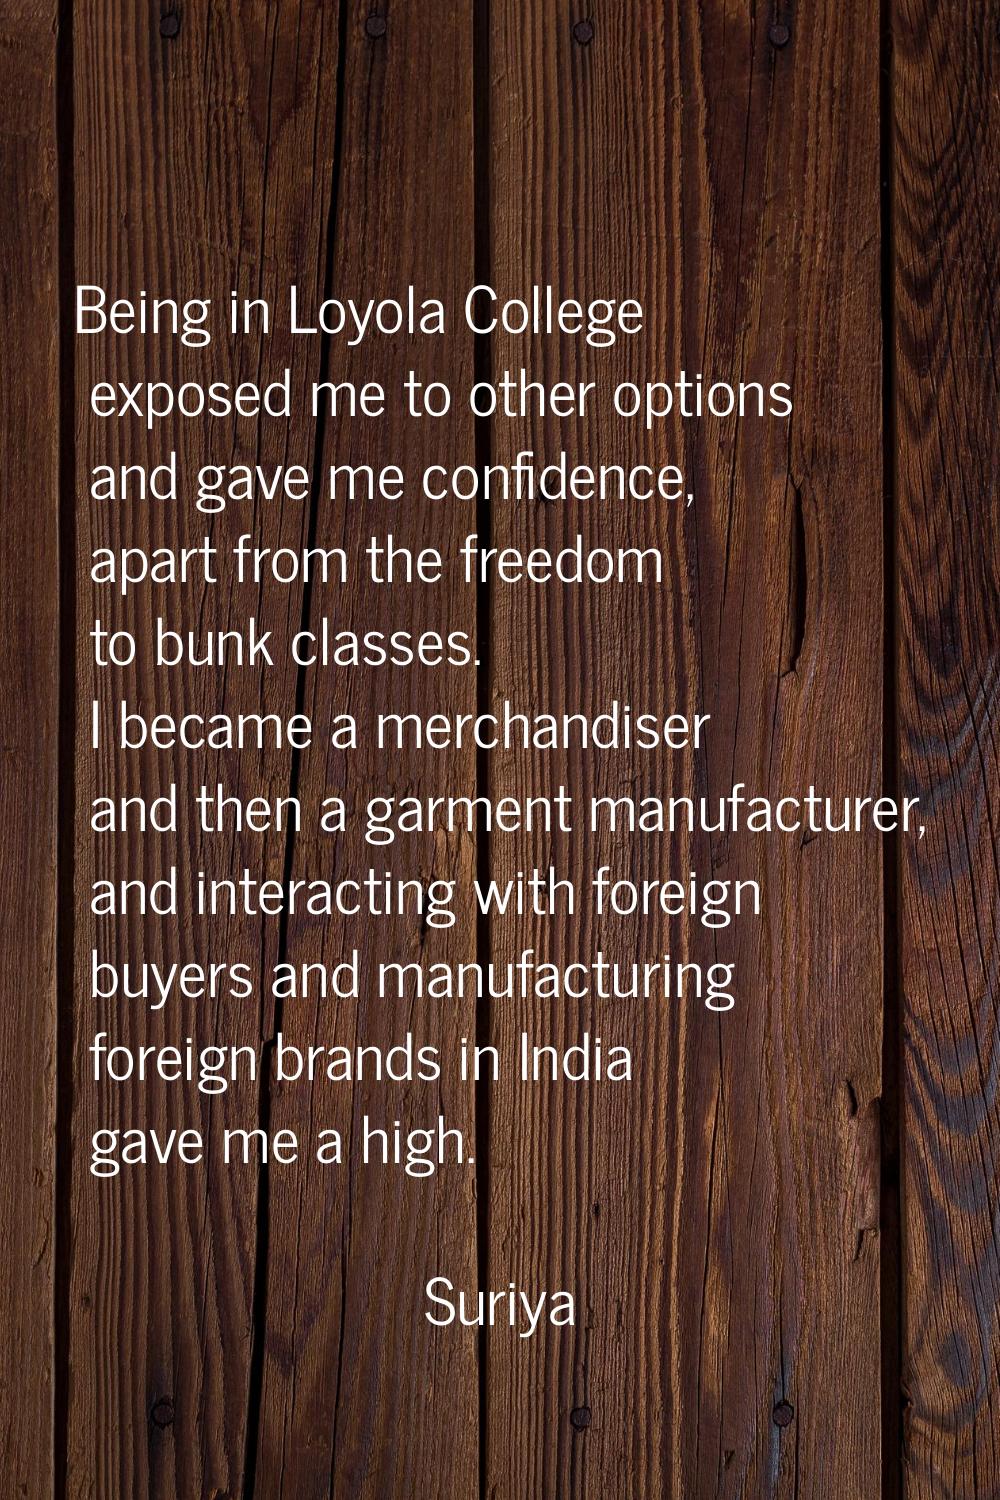 Being in Loyola College exposed me to other options and gave me confidence, apart from the freedom 